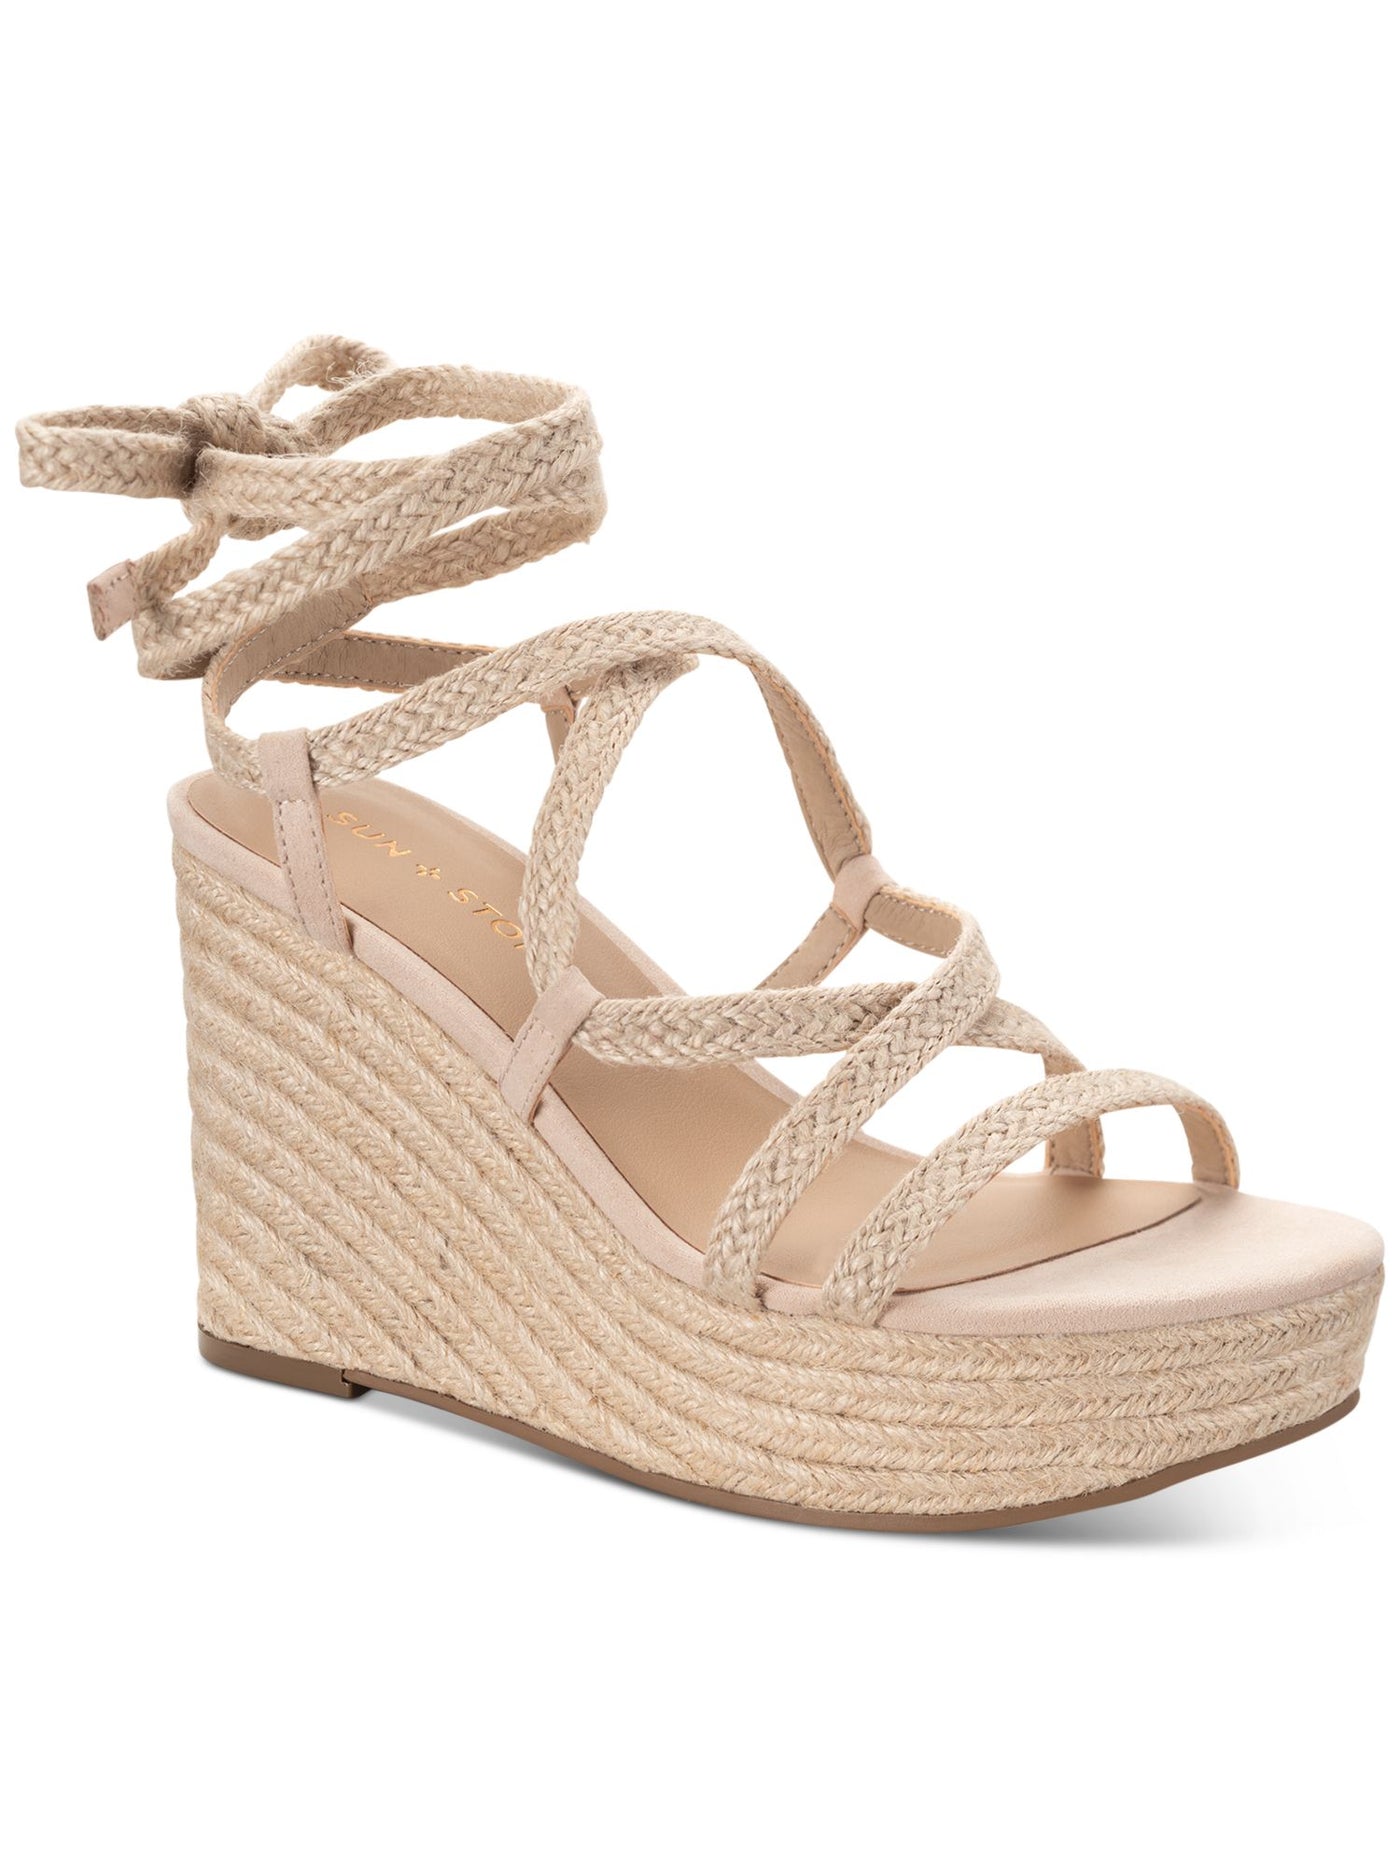 SUN STONE Womens Beige Textured Woven Padded 1.5 Platform Ankle Strap Strappy Trinnie Round Toe Wedge Lace-Up Espadrille Shoes 6.5 M